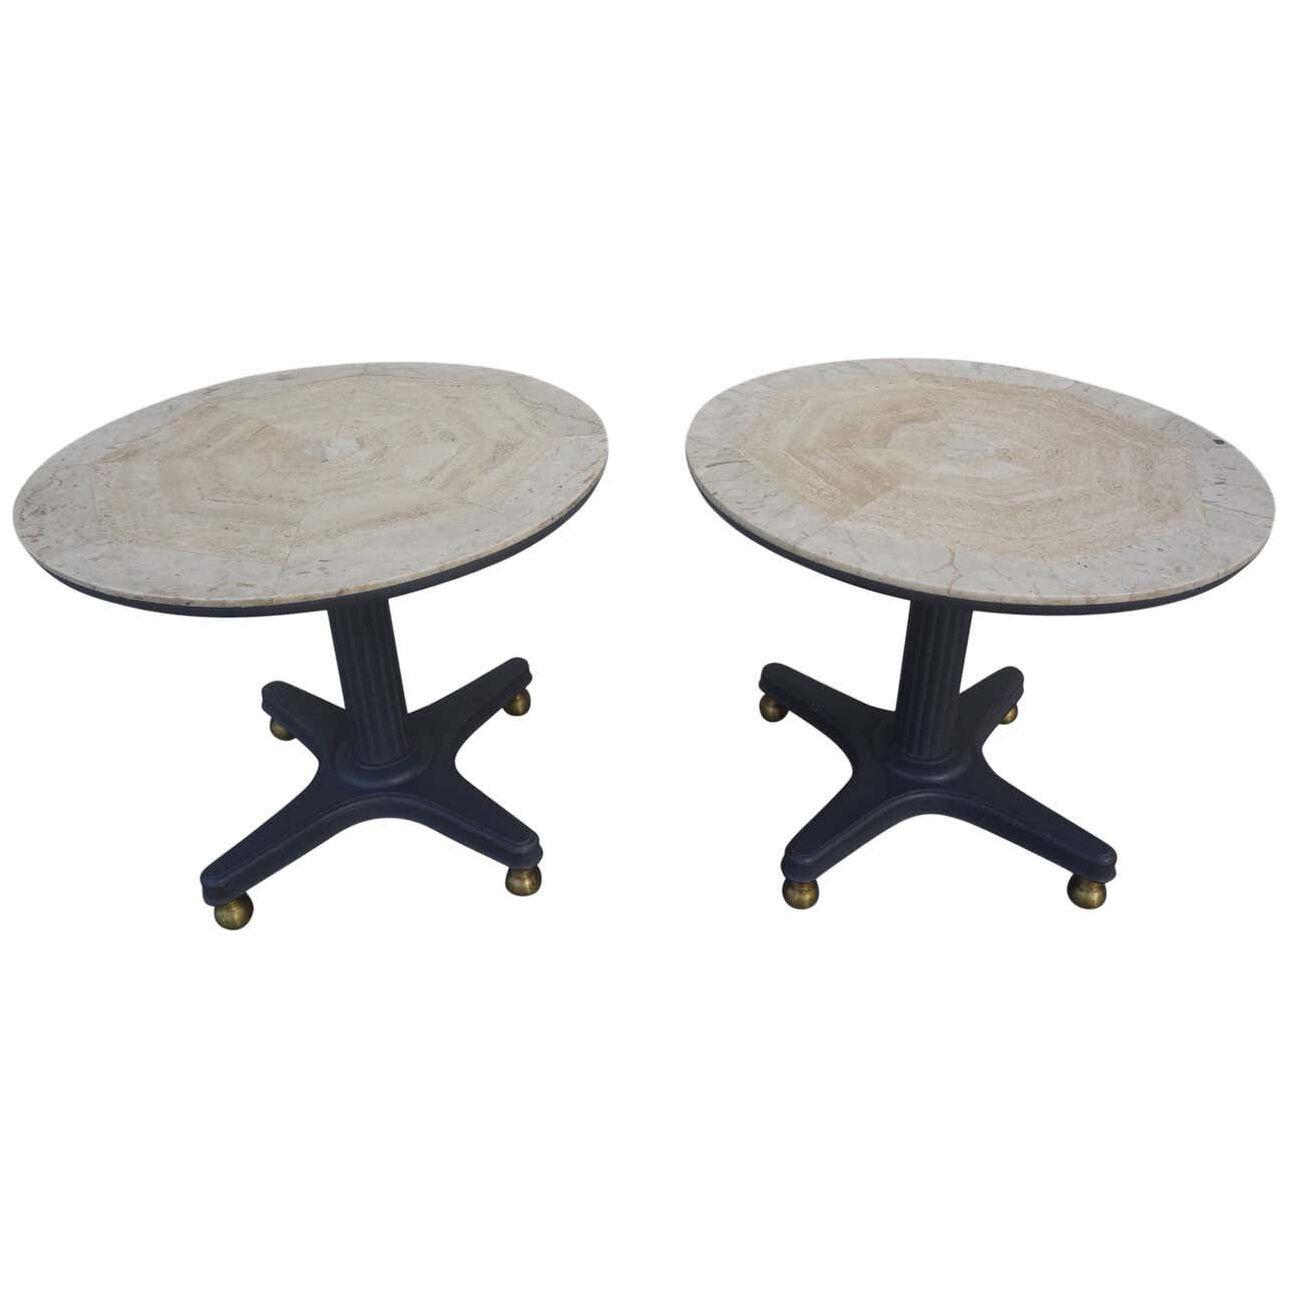 Pair of Hollywood Regency Tables with Travertine Tops